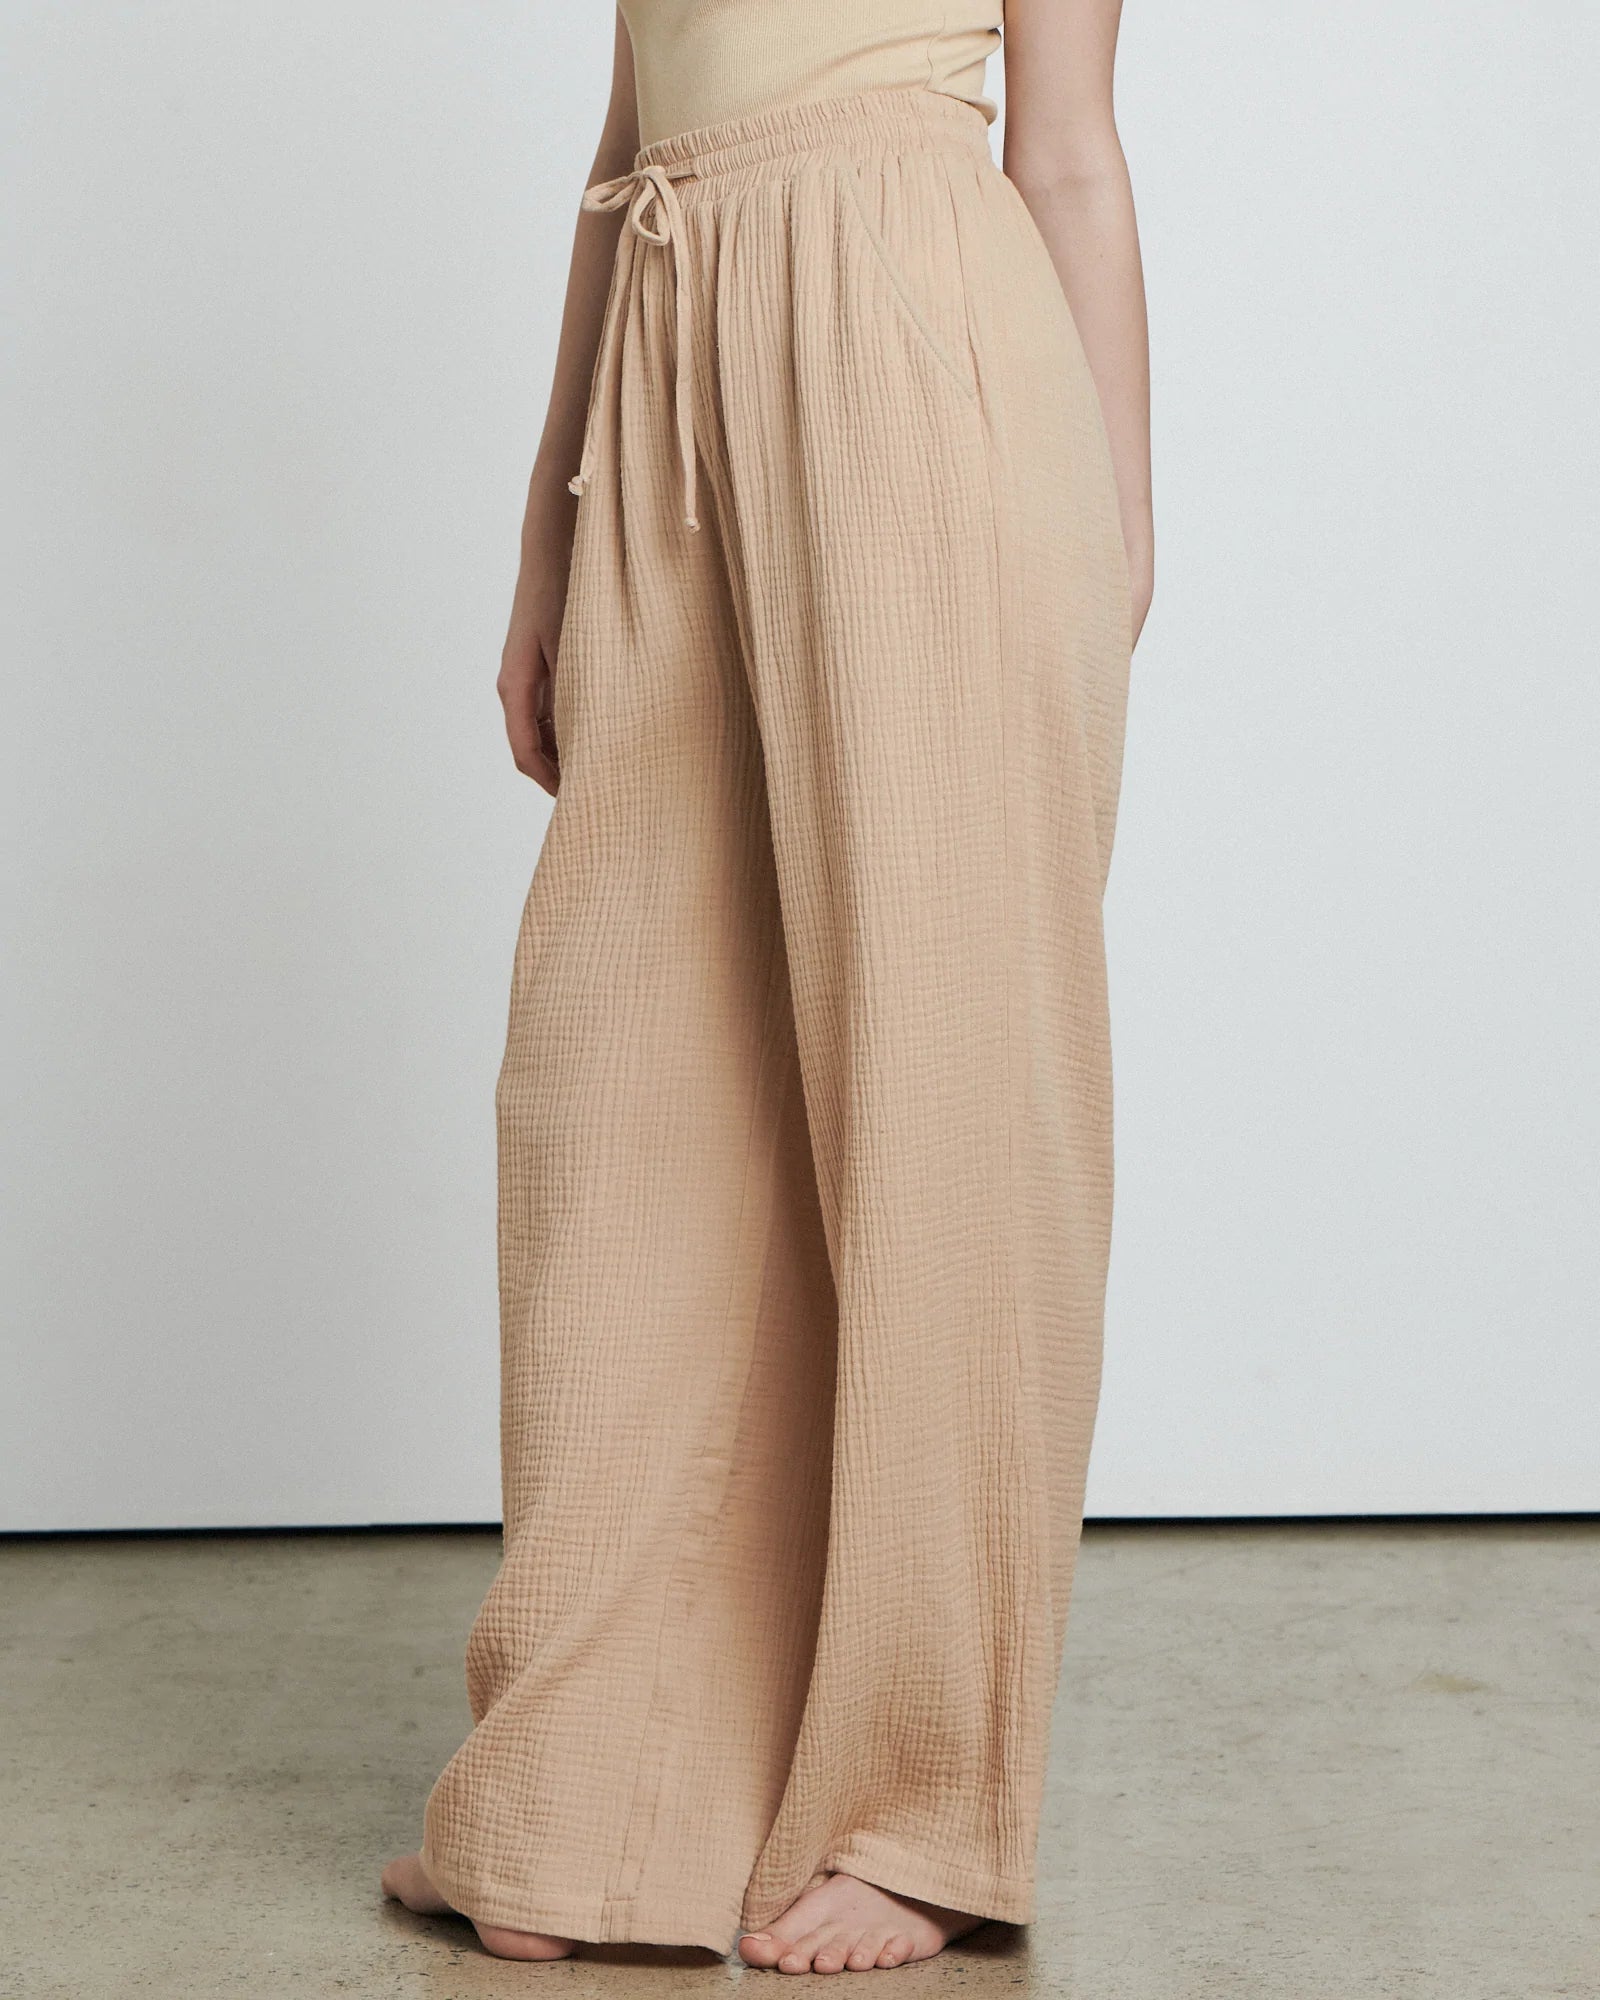 BARE BY CHARLIE HOLIDAY - THE BEACH PANT - SAND